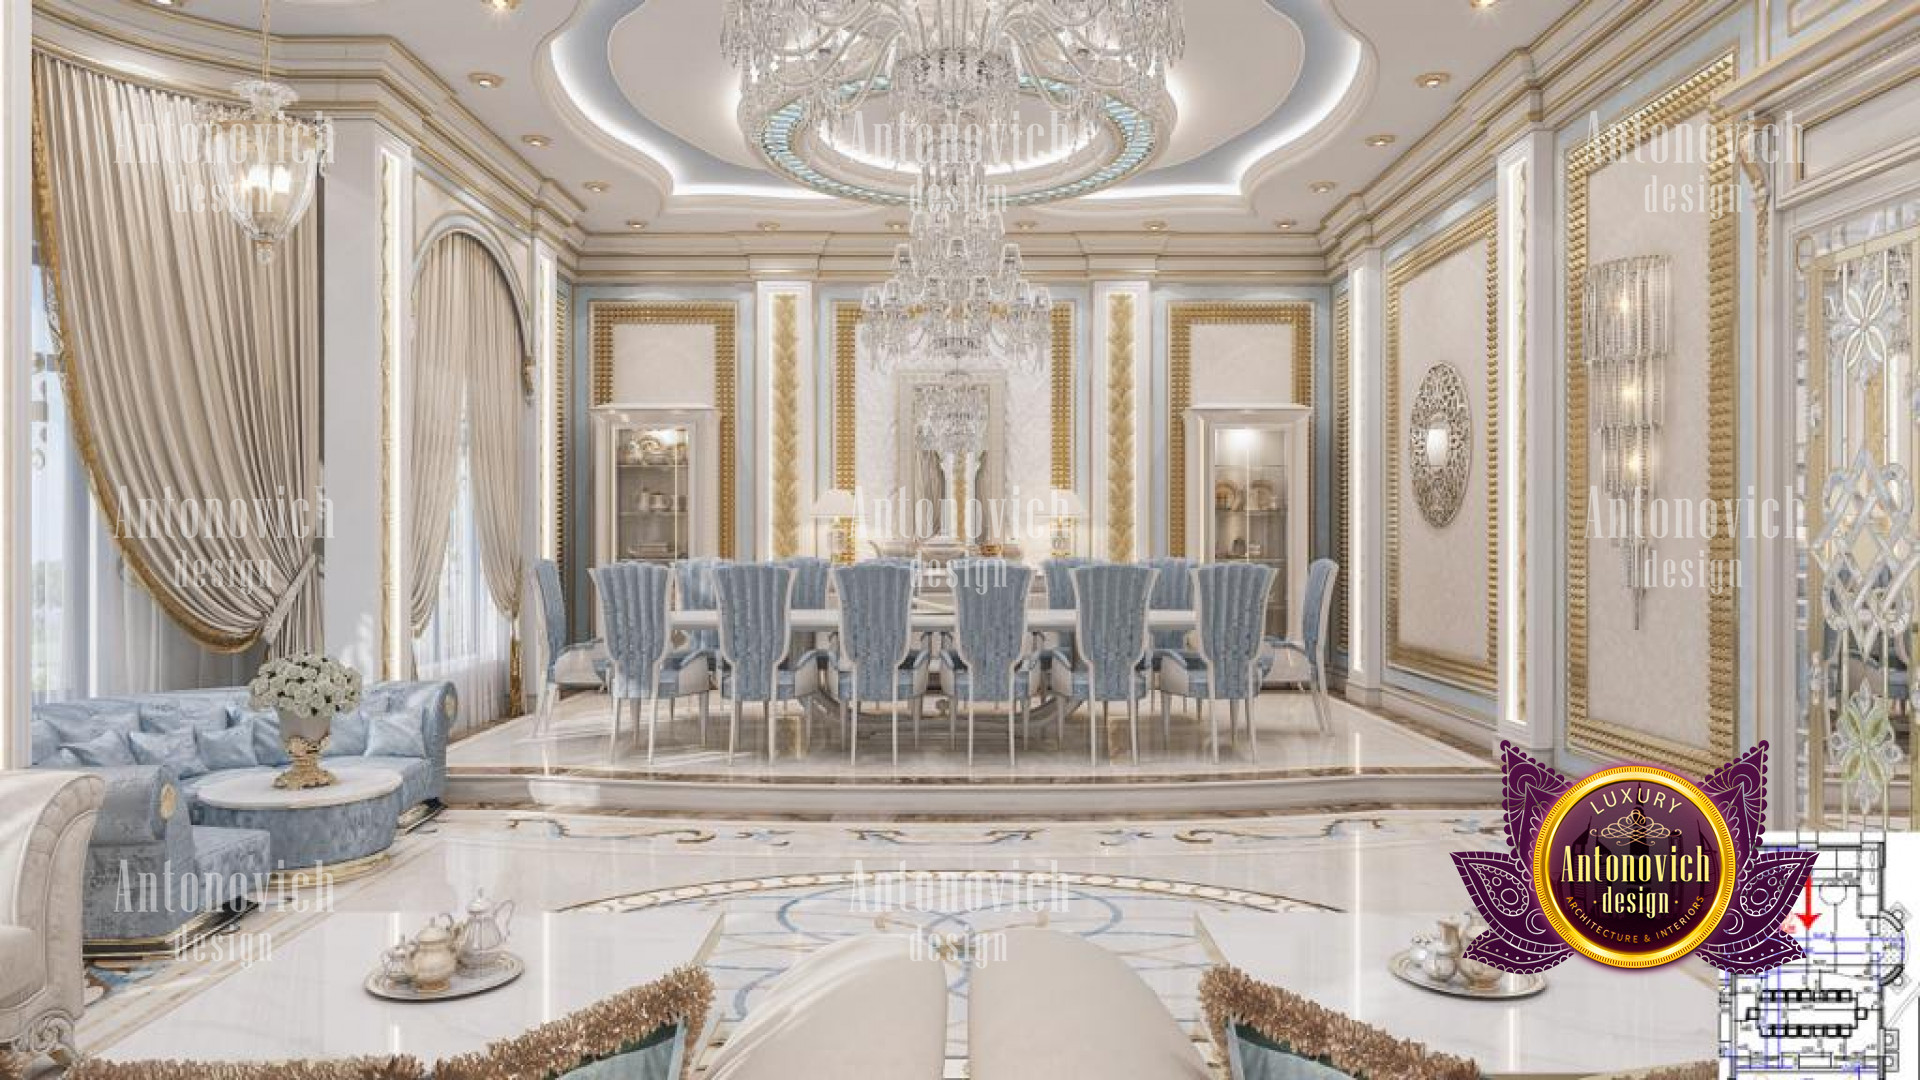 JEDDAH THE MOST INCREDIBLE INTERIOR DESIGN COMPANIES